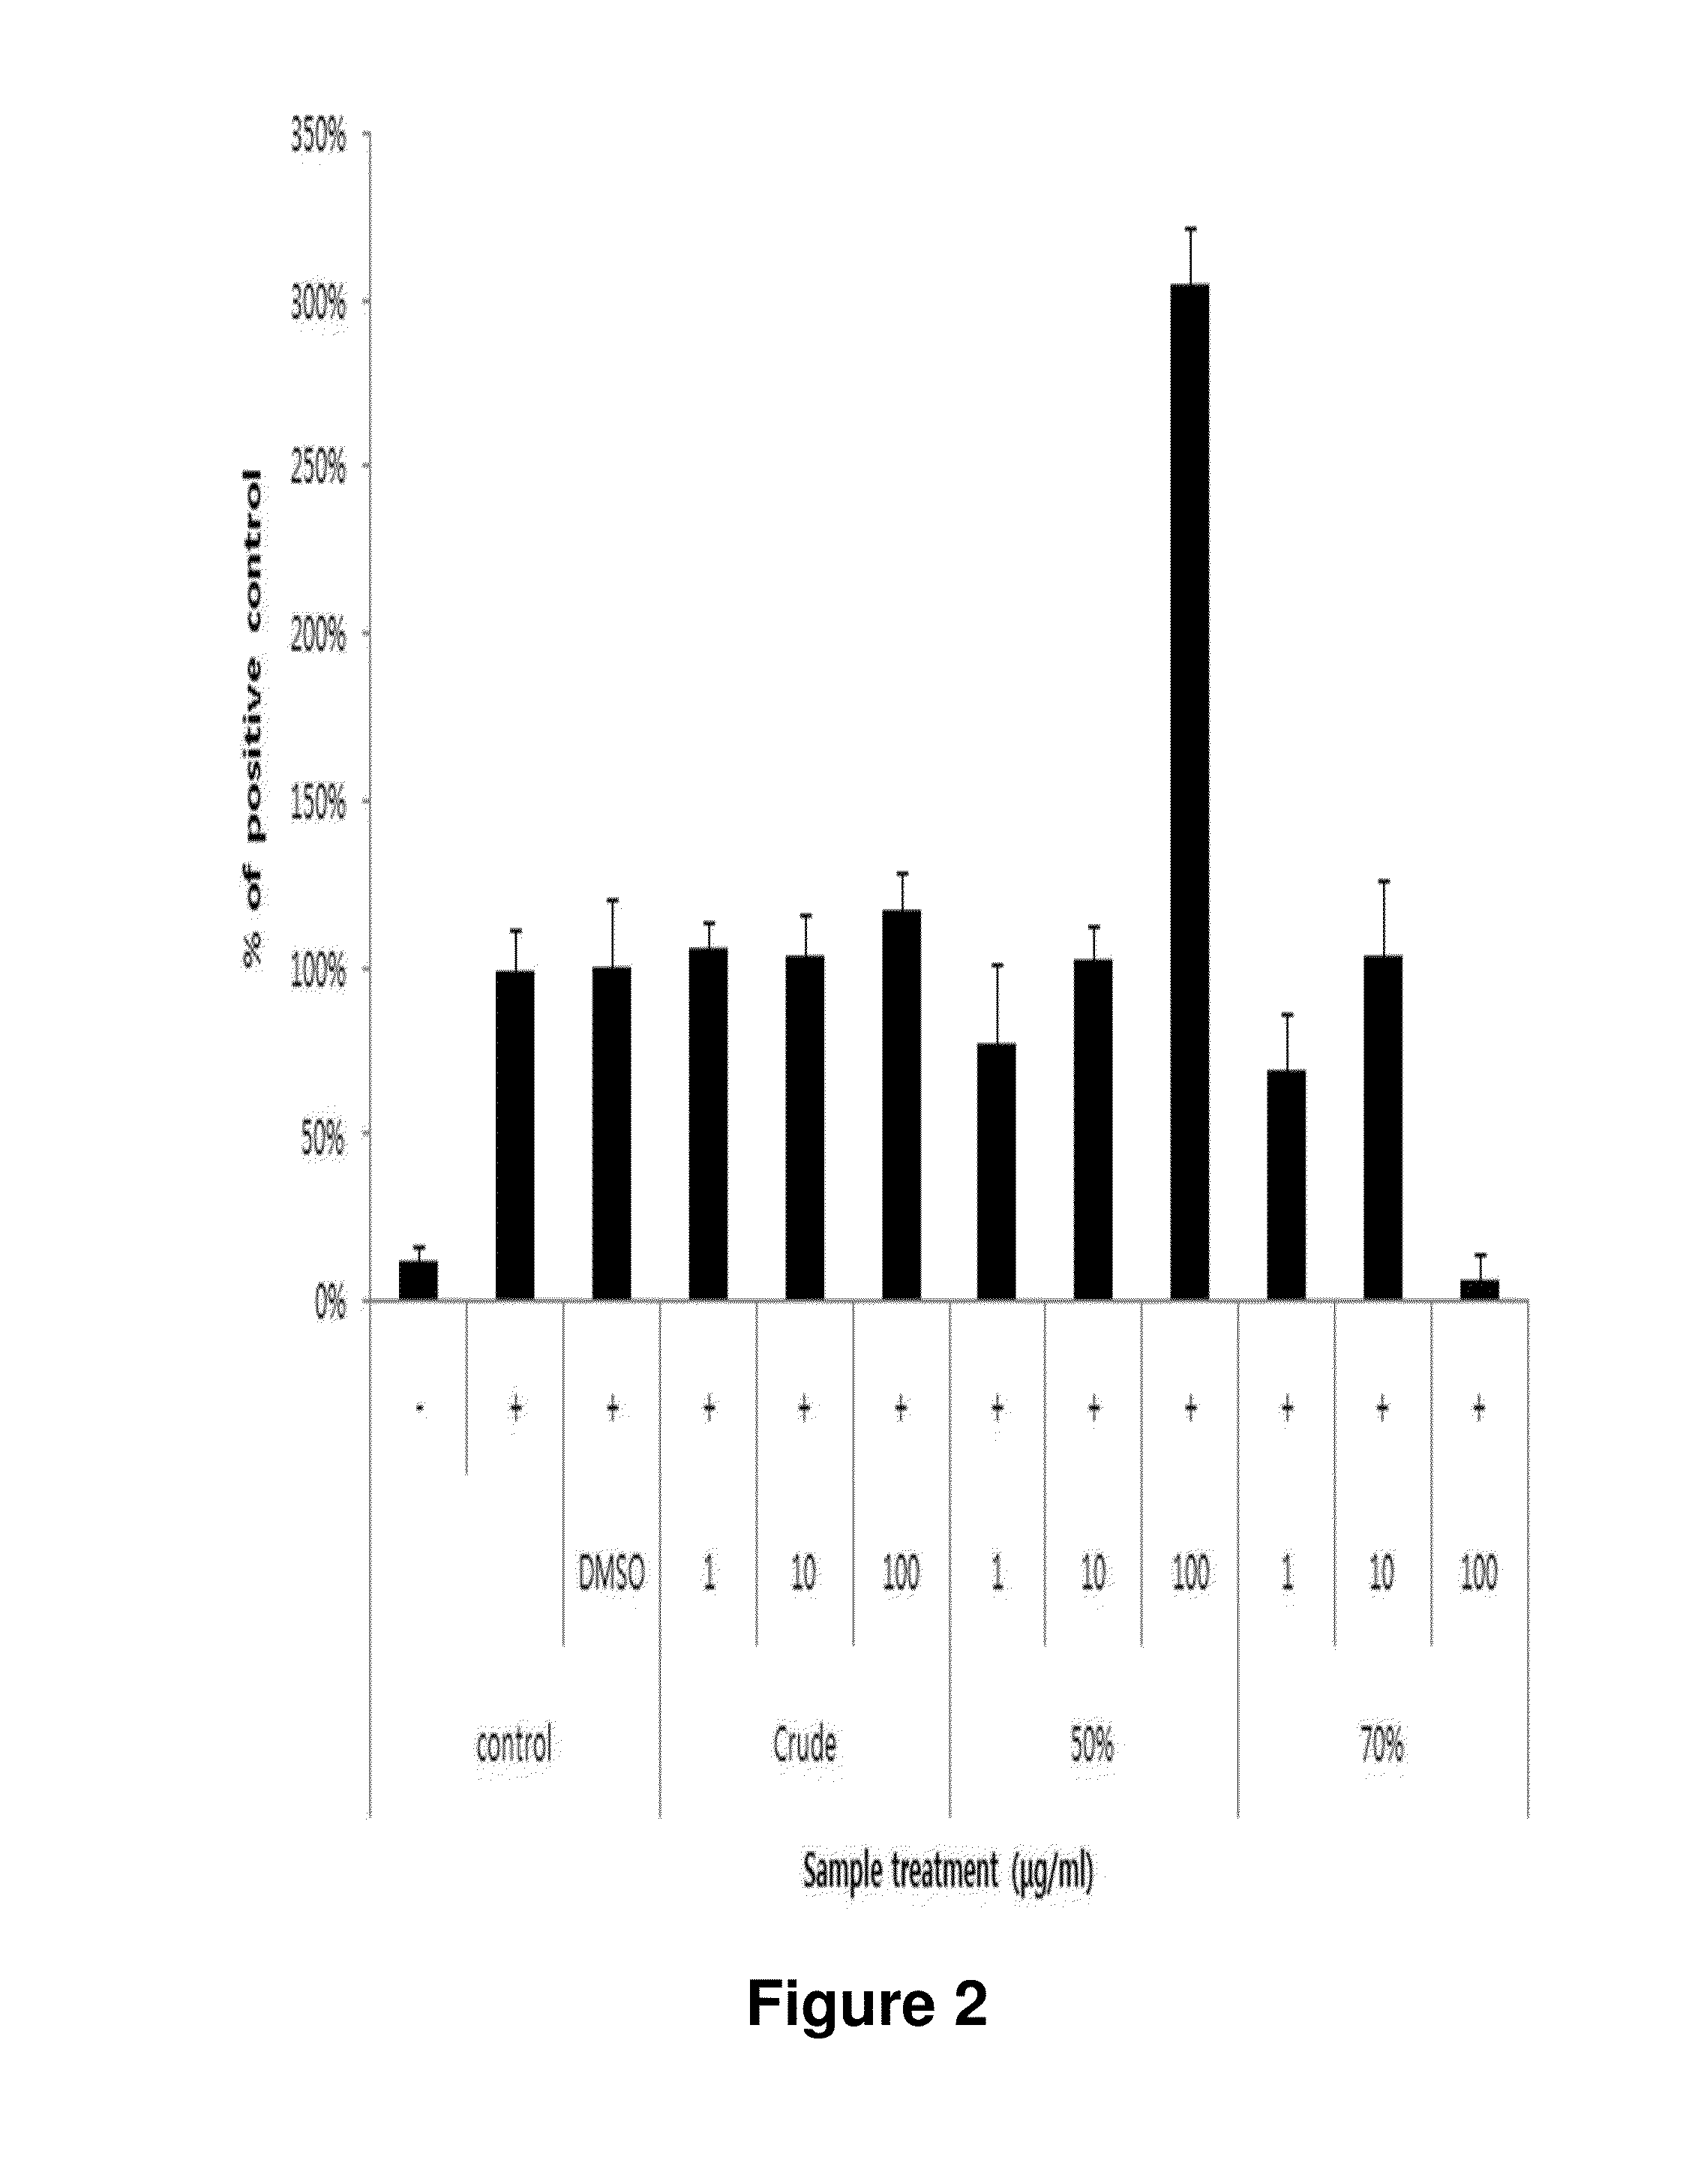 Composition Comprising Centipede Grass Extracts or Fractions Thereof as Active Ingredients